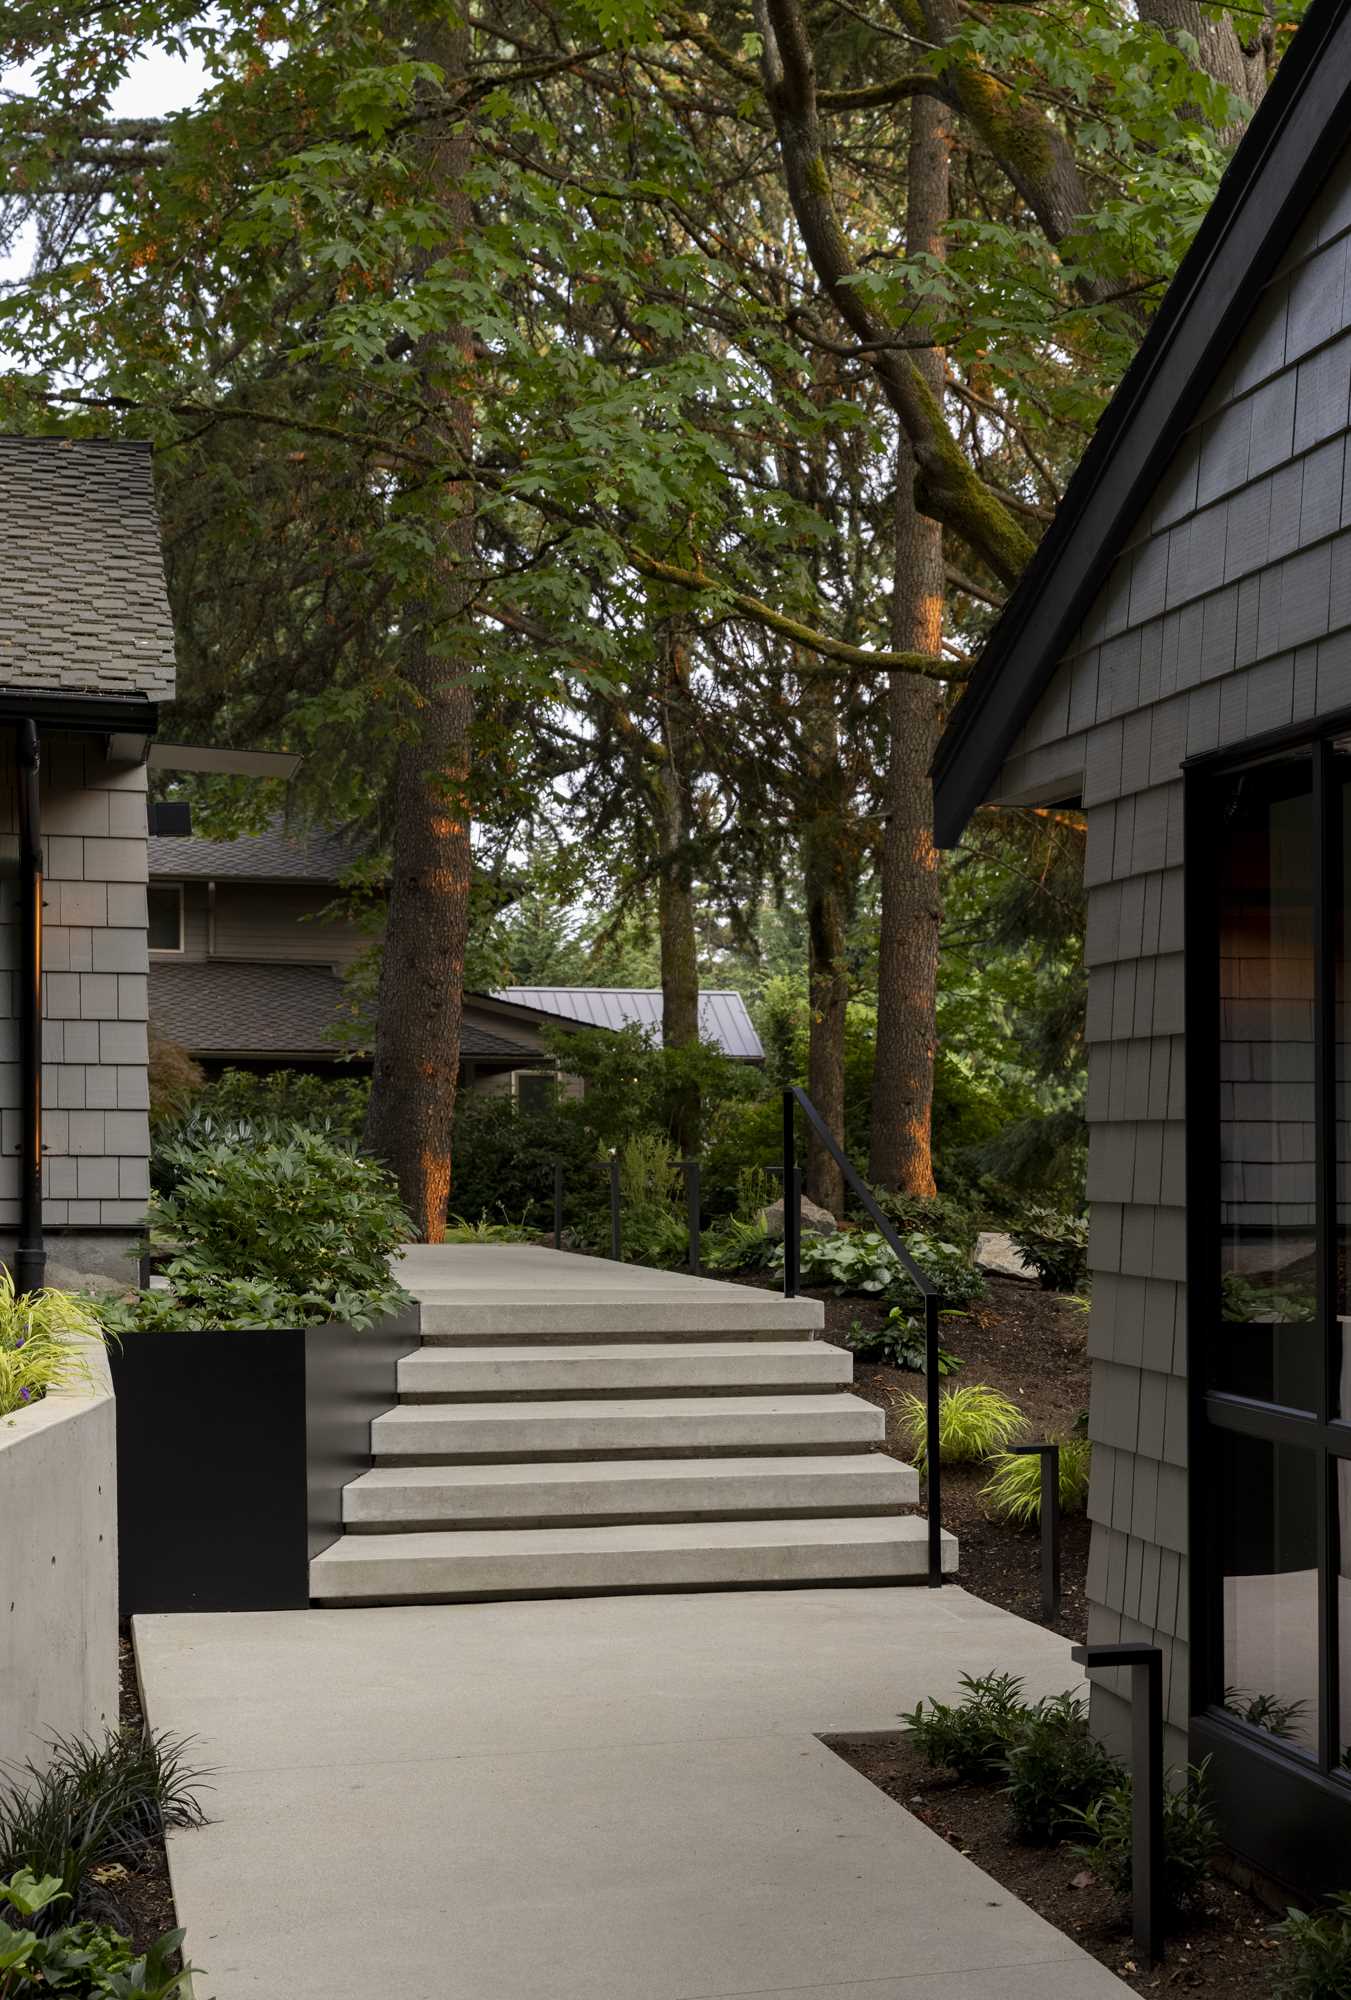 Concrete steps, steel planters, outdoor lighting, and angled landscape walls guide guests through the tree-filled property to the front door of this contemporary home.